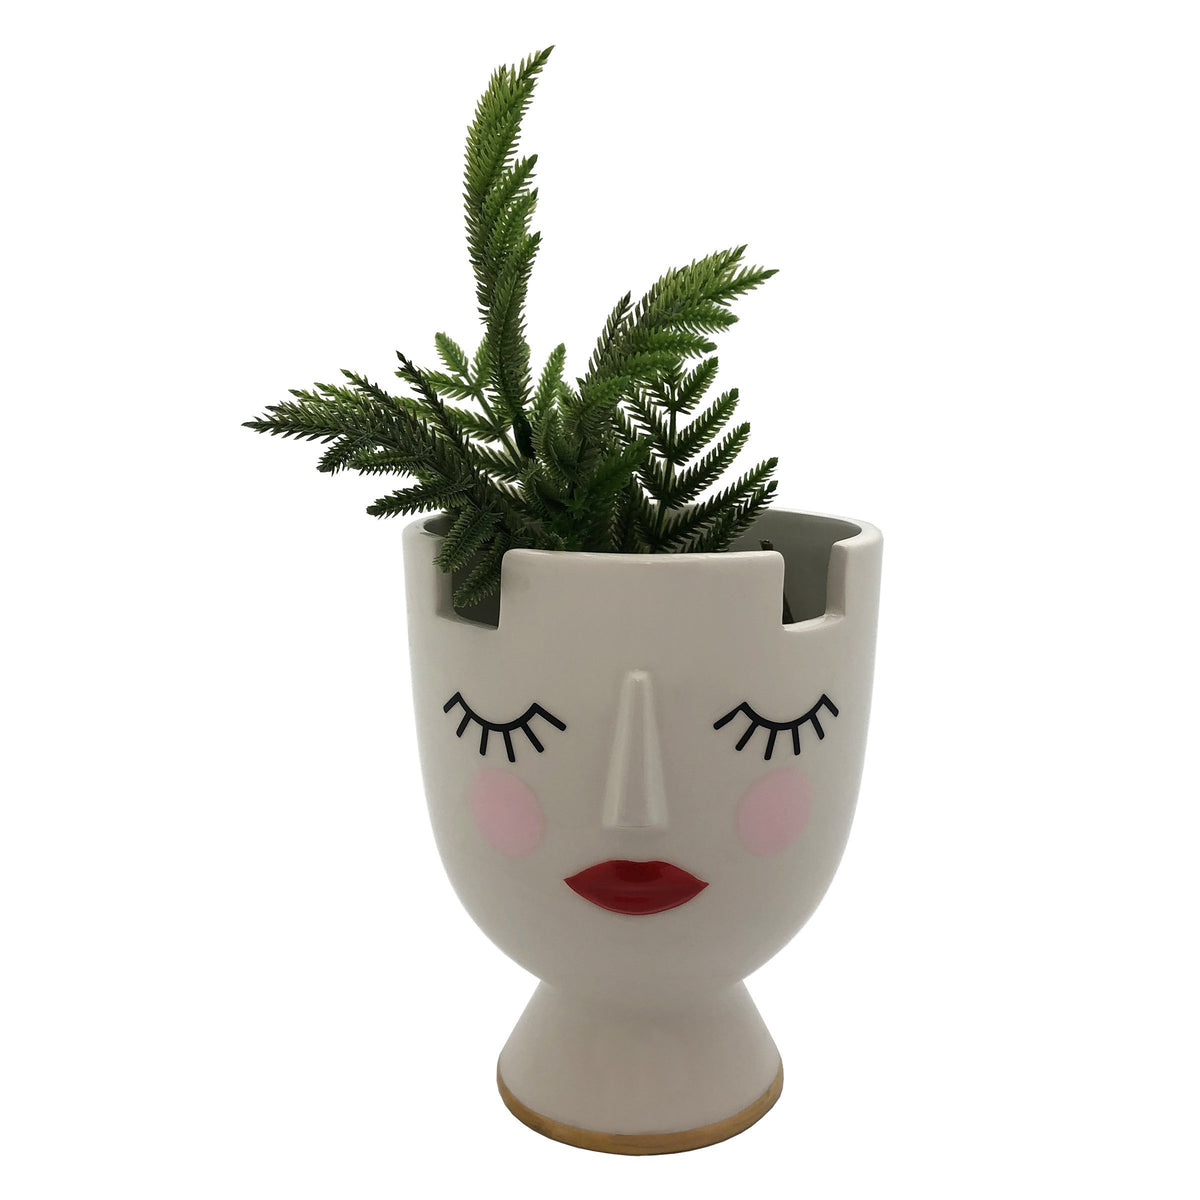 Lady Hold All/Planter